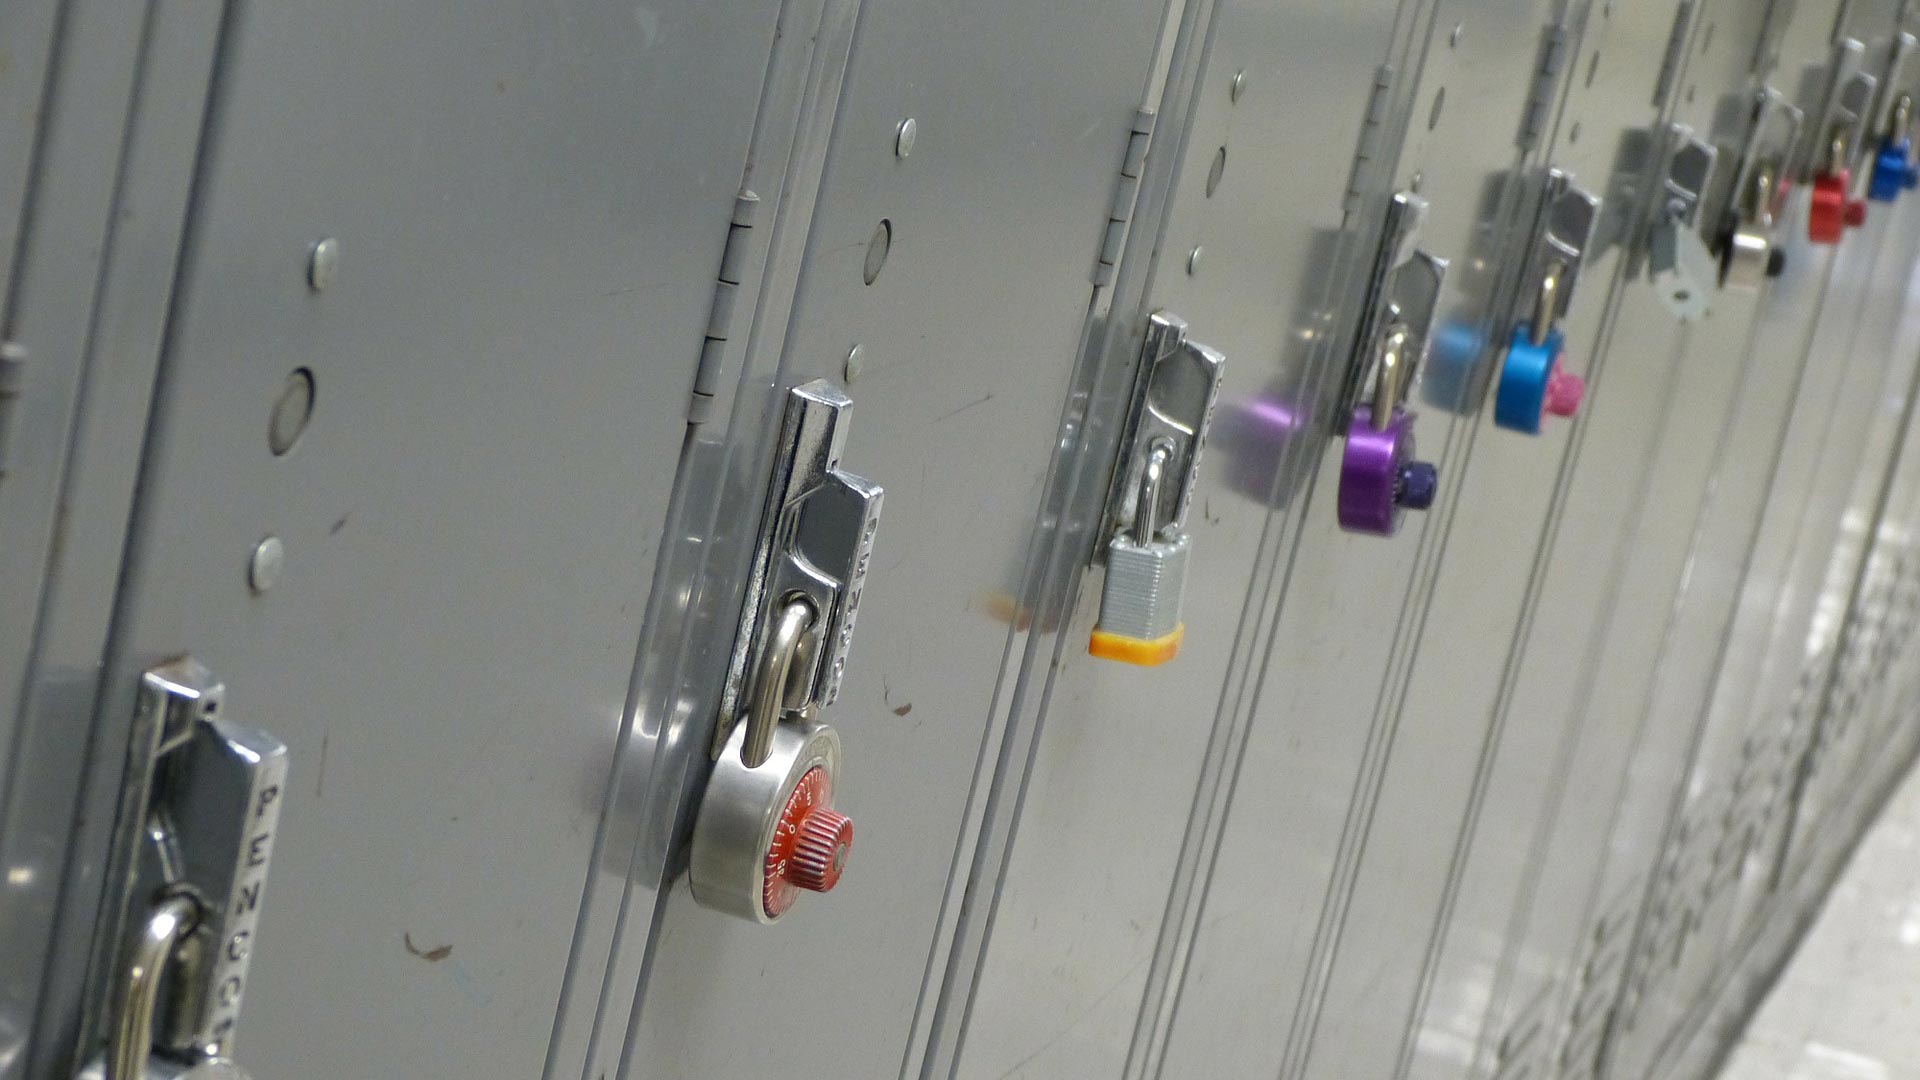 A line of lockers at a high school.